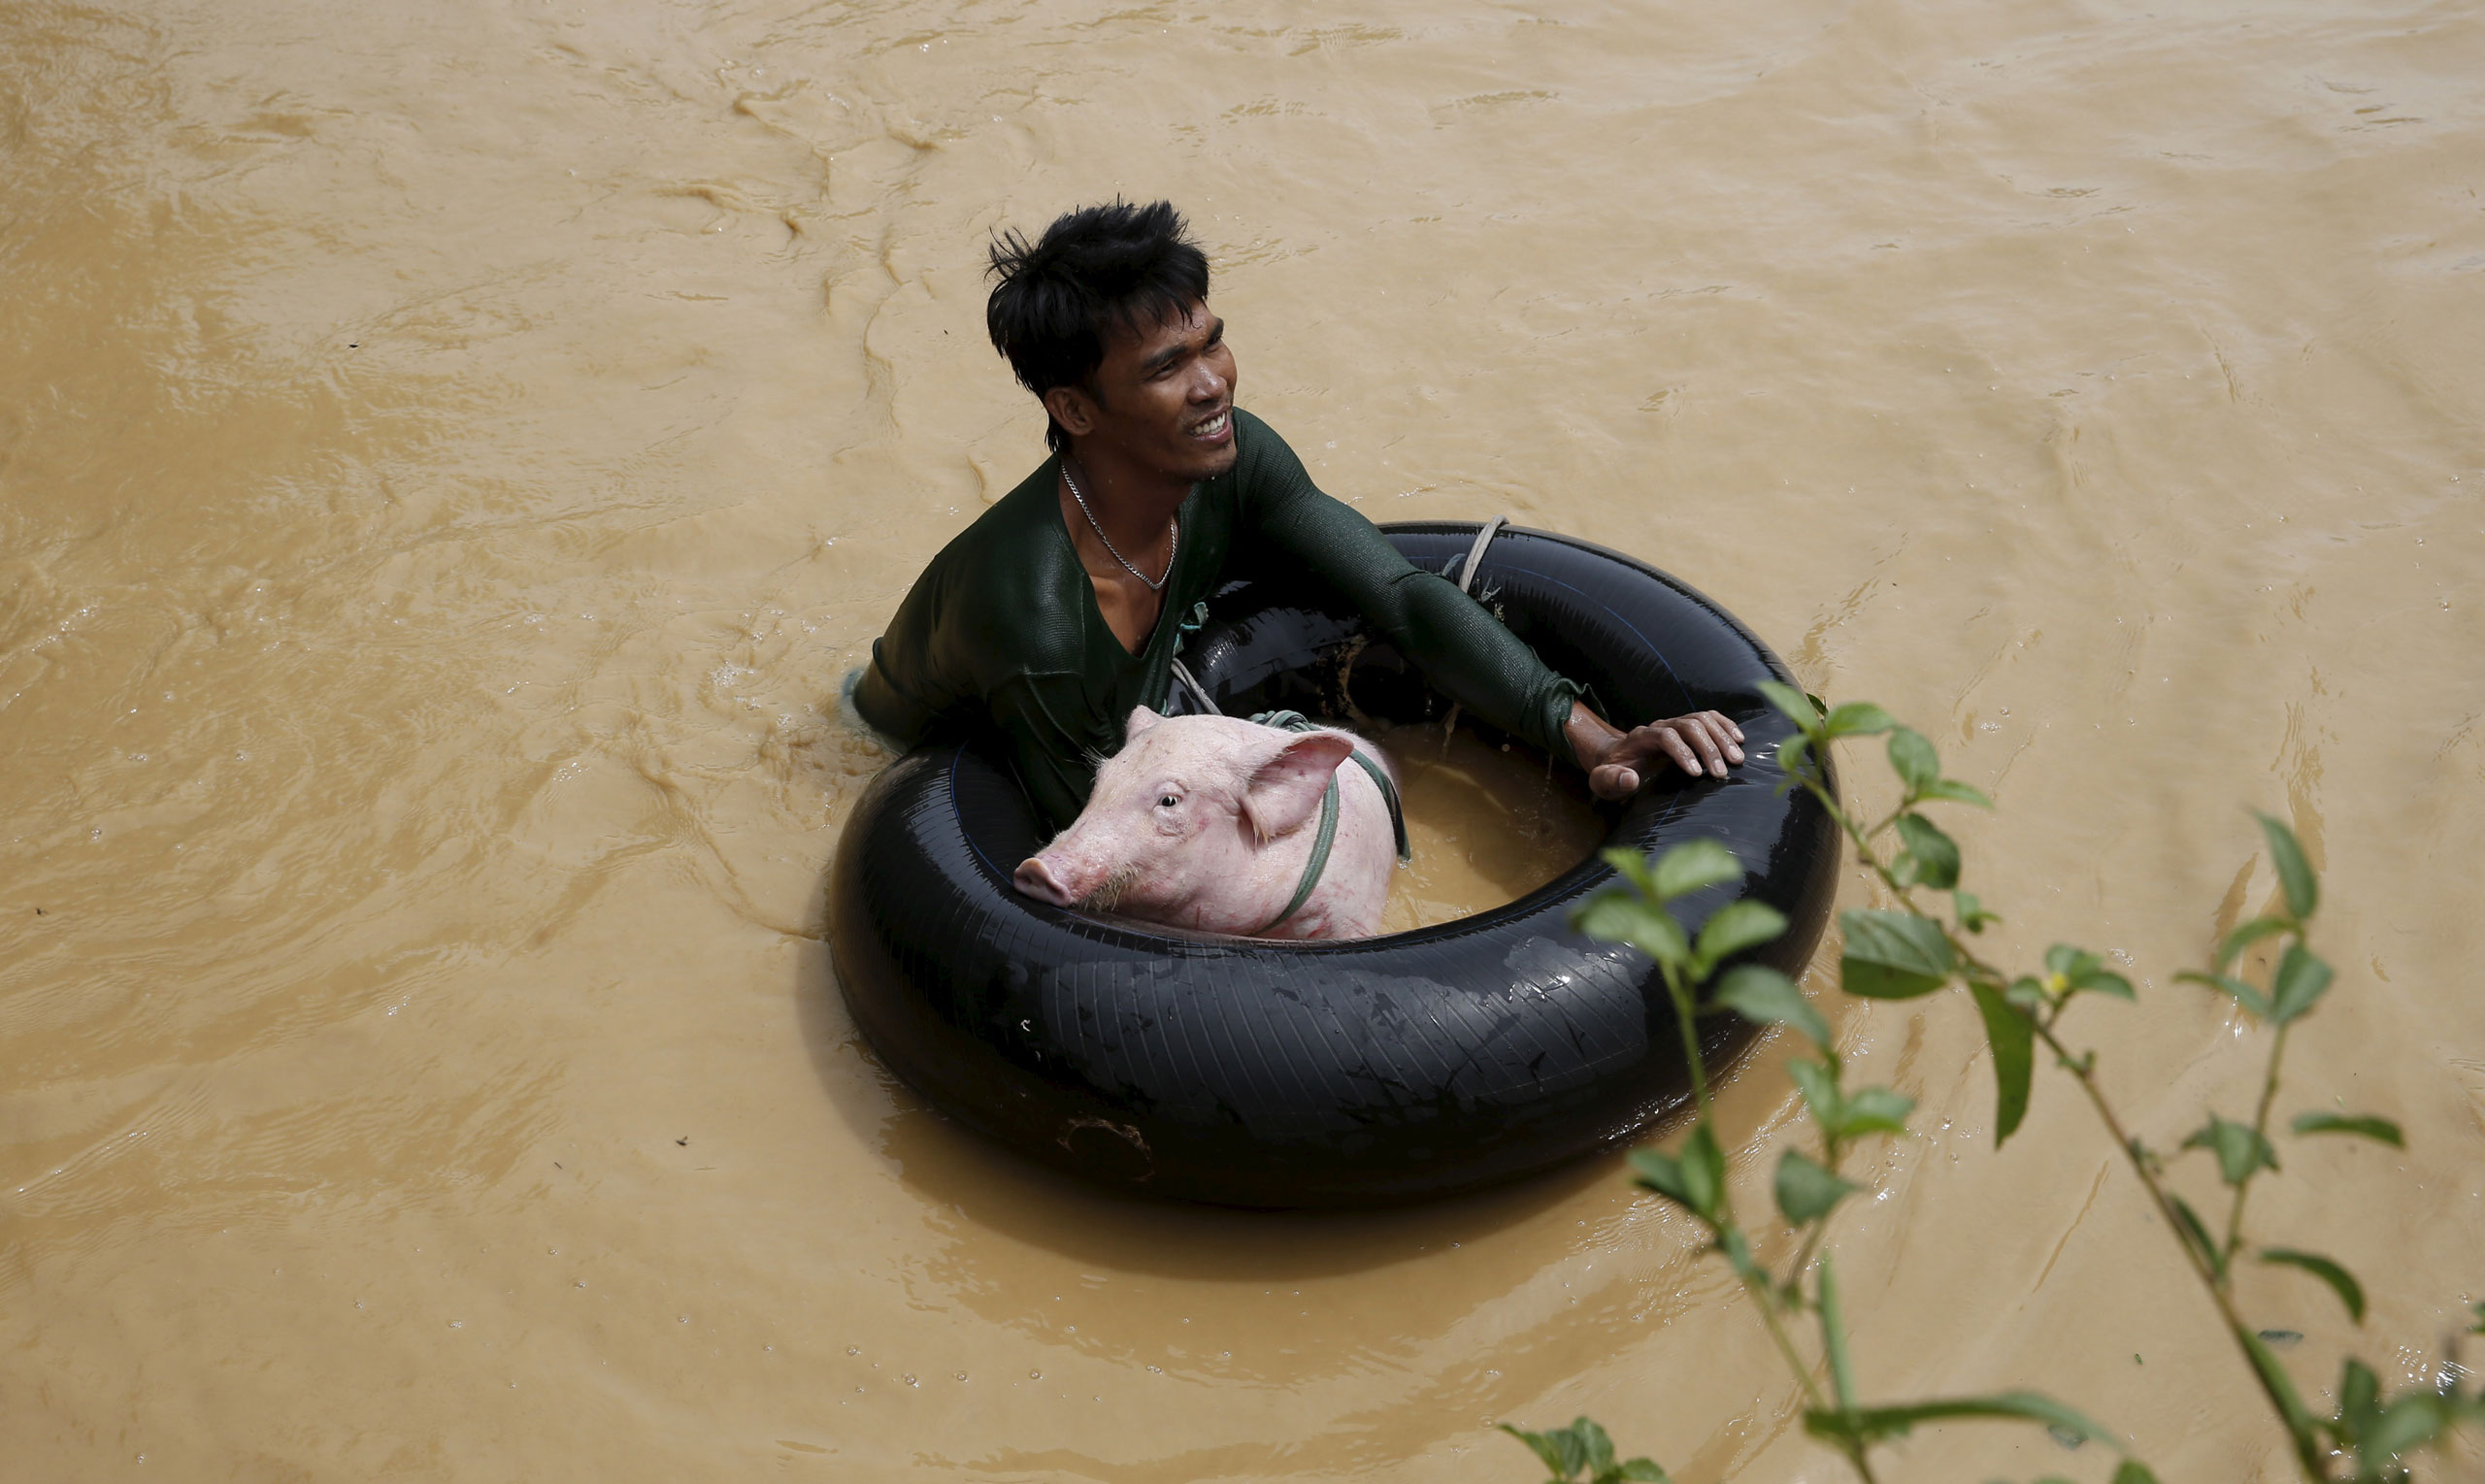 A man holds a pig on a float to cross a flooded road amidst a strong current in Sta Rosa, Nueva Ecija in northern Philippines. Oct. 19, 2015, after the area was hit by Typhoon Koppu.